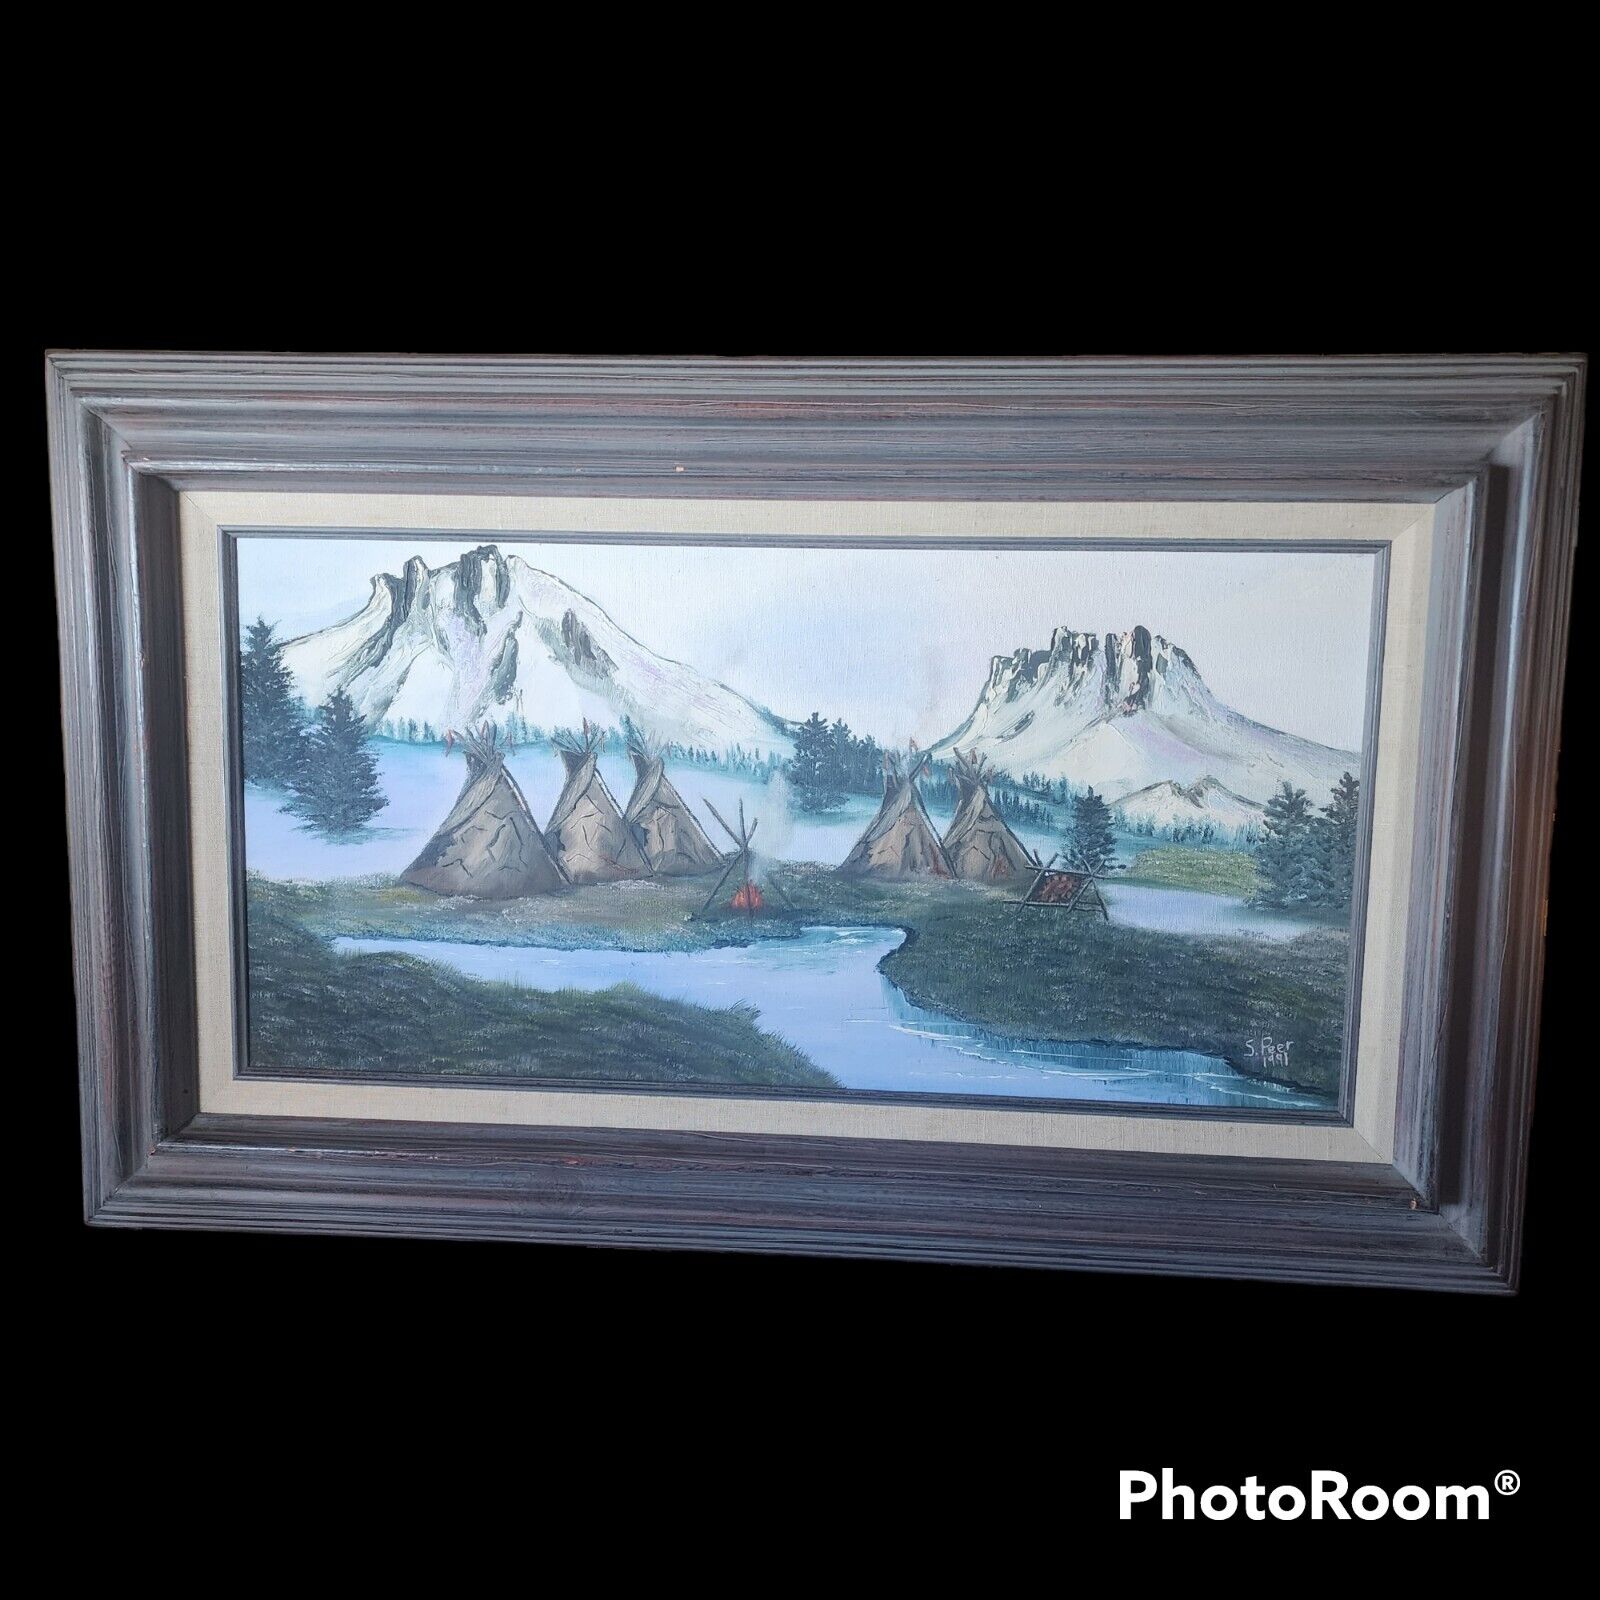 Vintage Painting. Native American Tipi\'s Under Snowy Mountains. Stunning